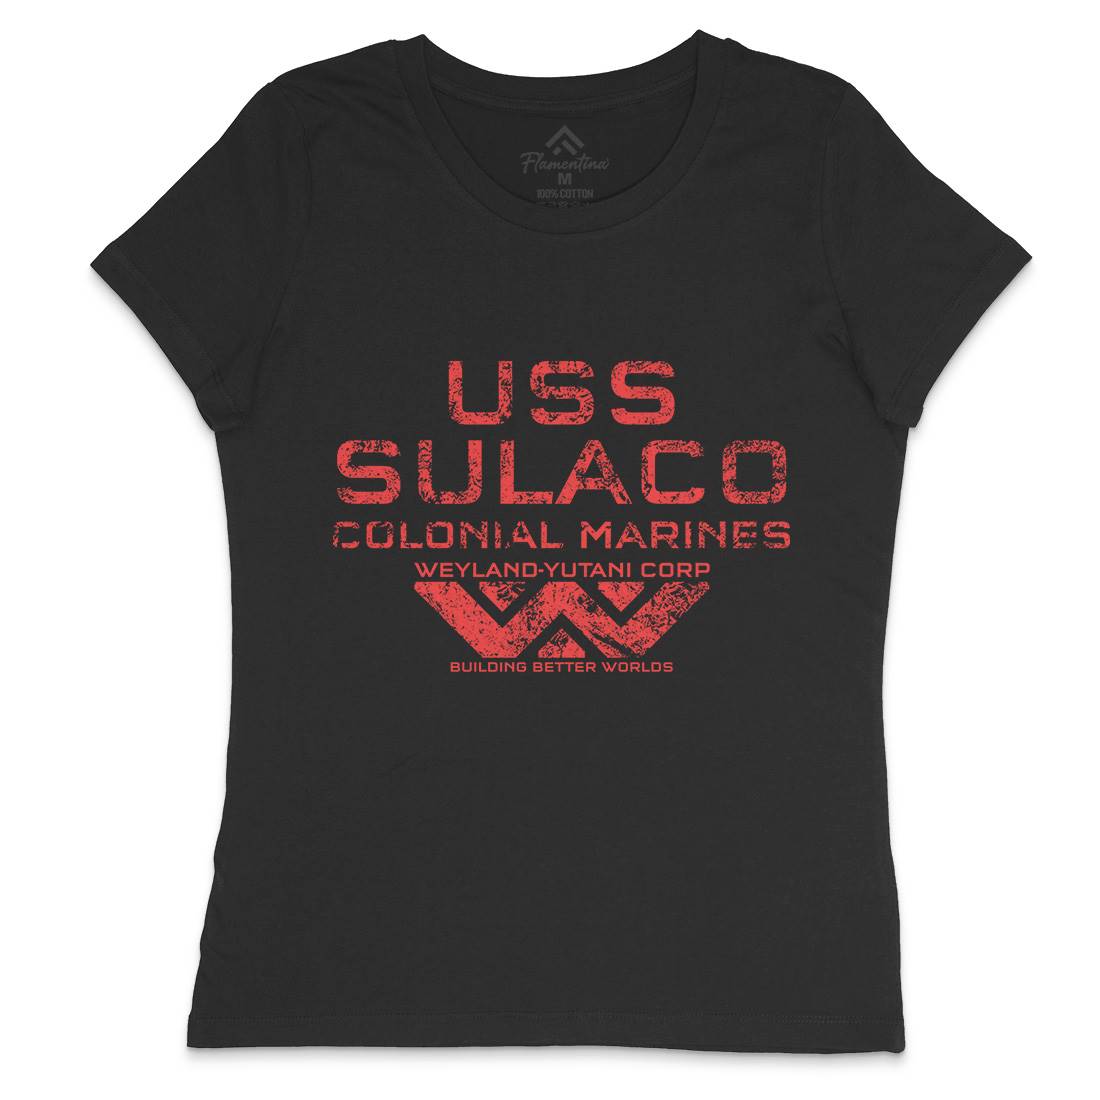 Uss Sulaco Womens Crew Neck T-Shirt Space D139